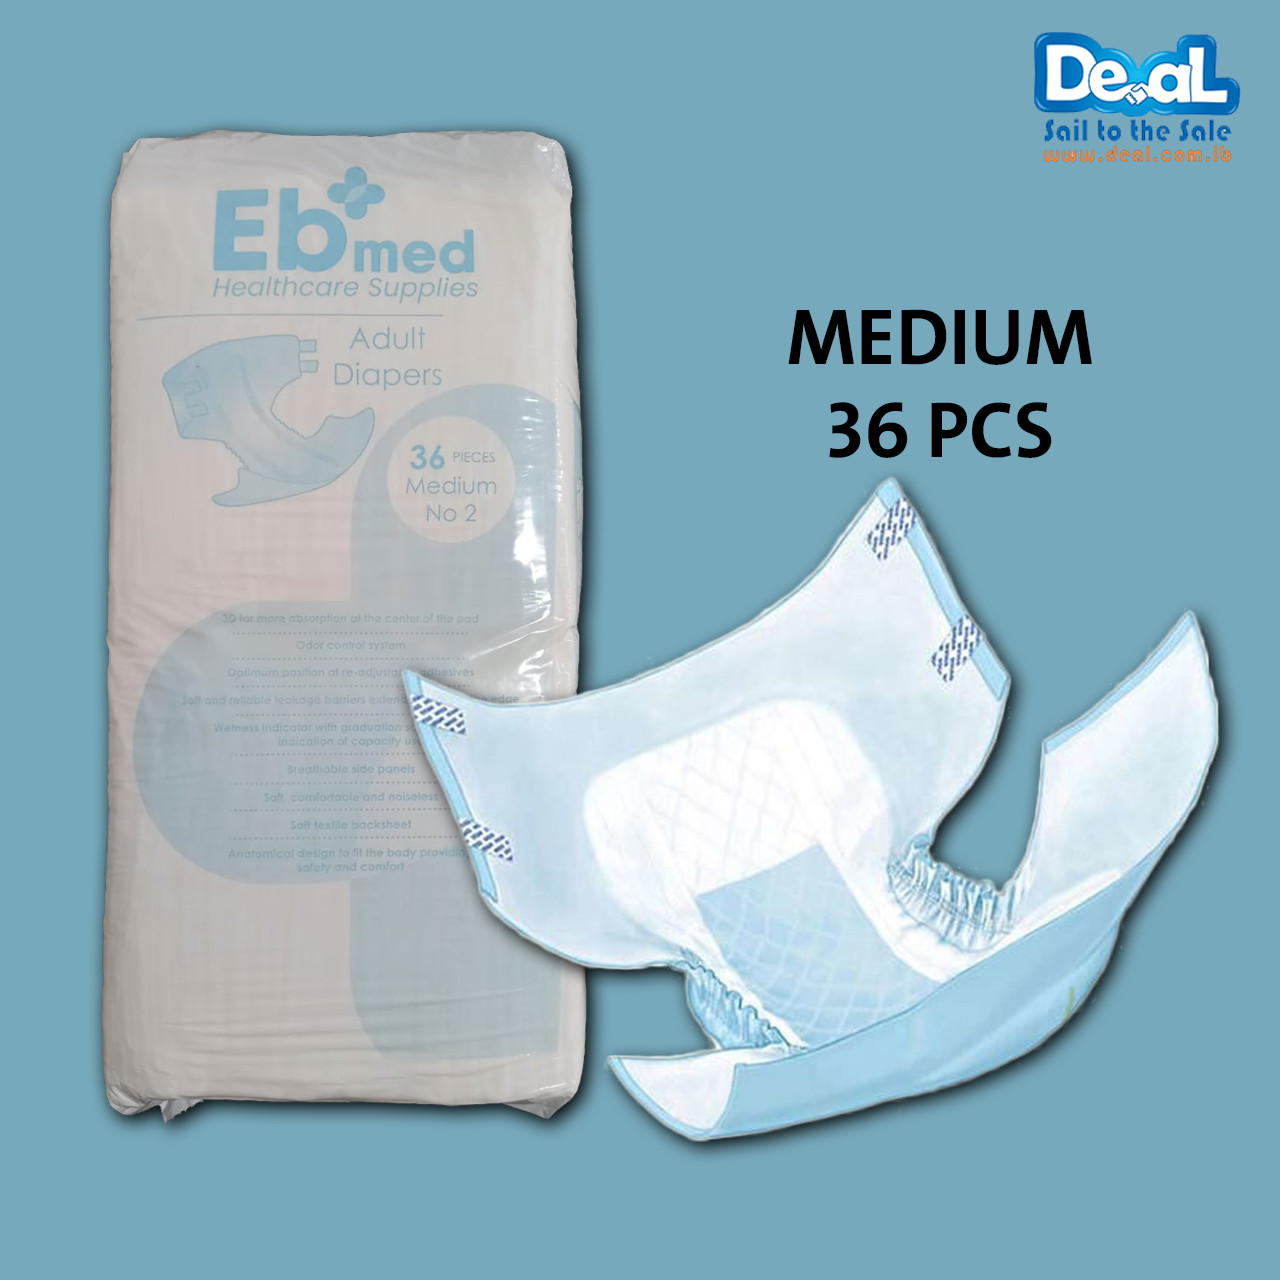 Eb+med+Adult+Diapers+36+Pieces+%7C+Medium+Size